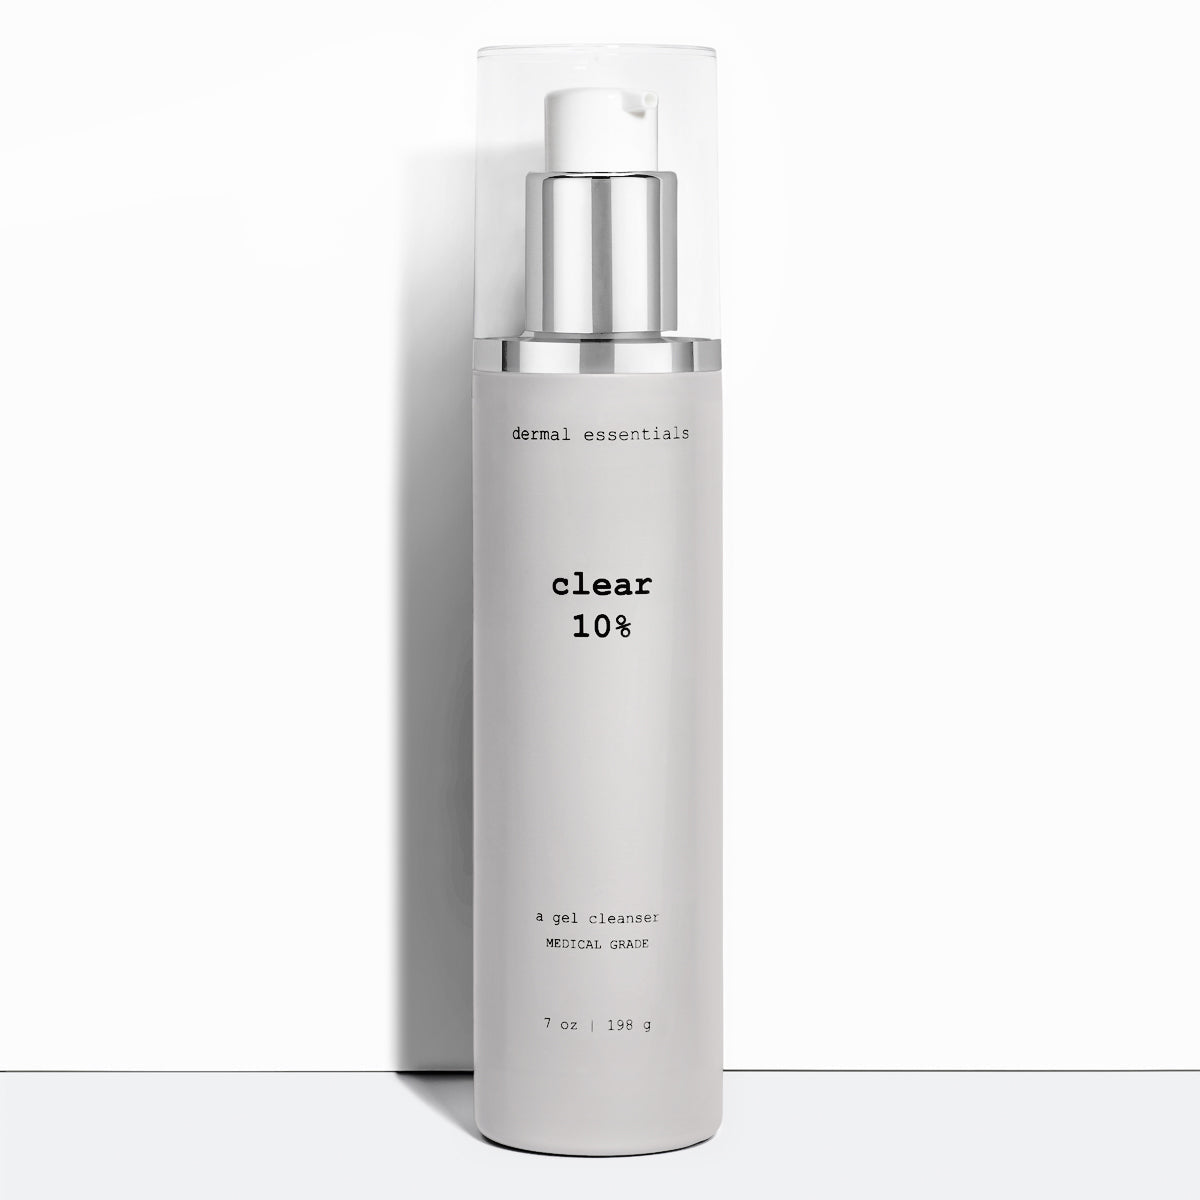 Full size 7 oz. Silver cylinder plastic bottle silver white pump clear plastic lid. Clear is a  benzoyl peroxide acne facial cleanser Dermal Essentials Medical Grade Skincare. A mini size is 5 ml of this facial cleanser skincare product   in a white plastic pump bottle with black letters and clear lid.